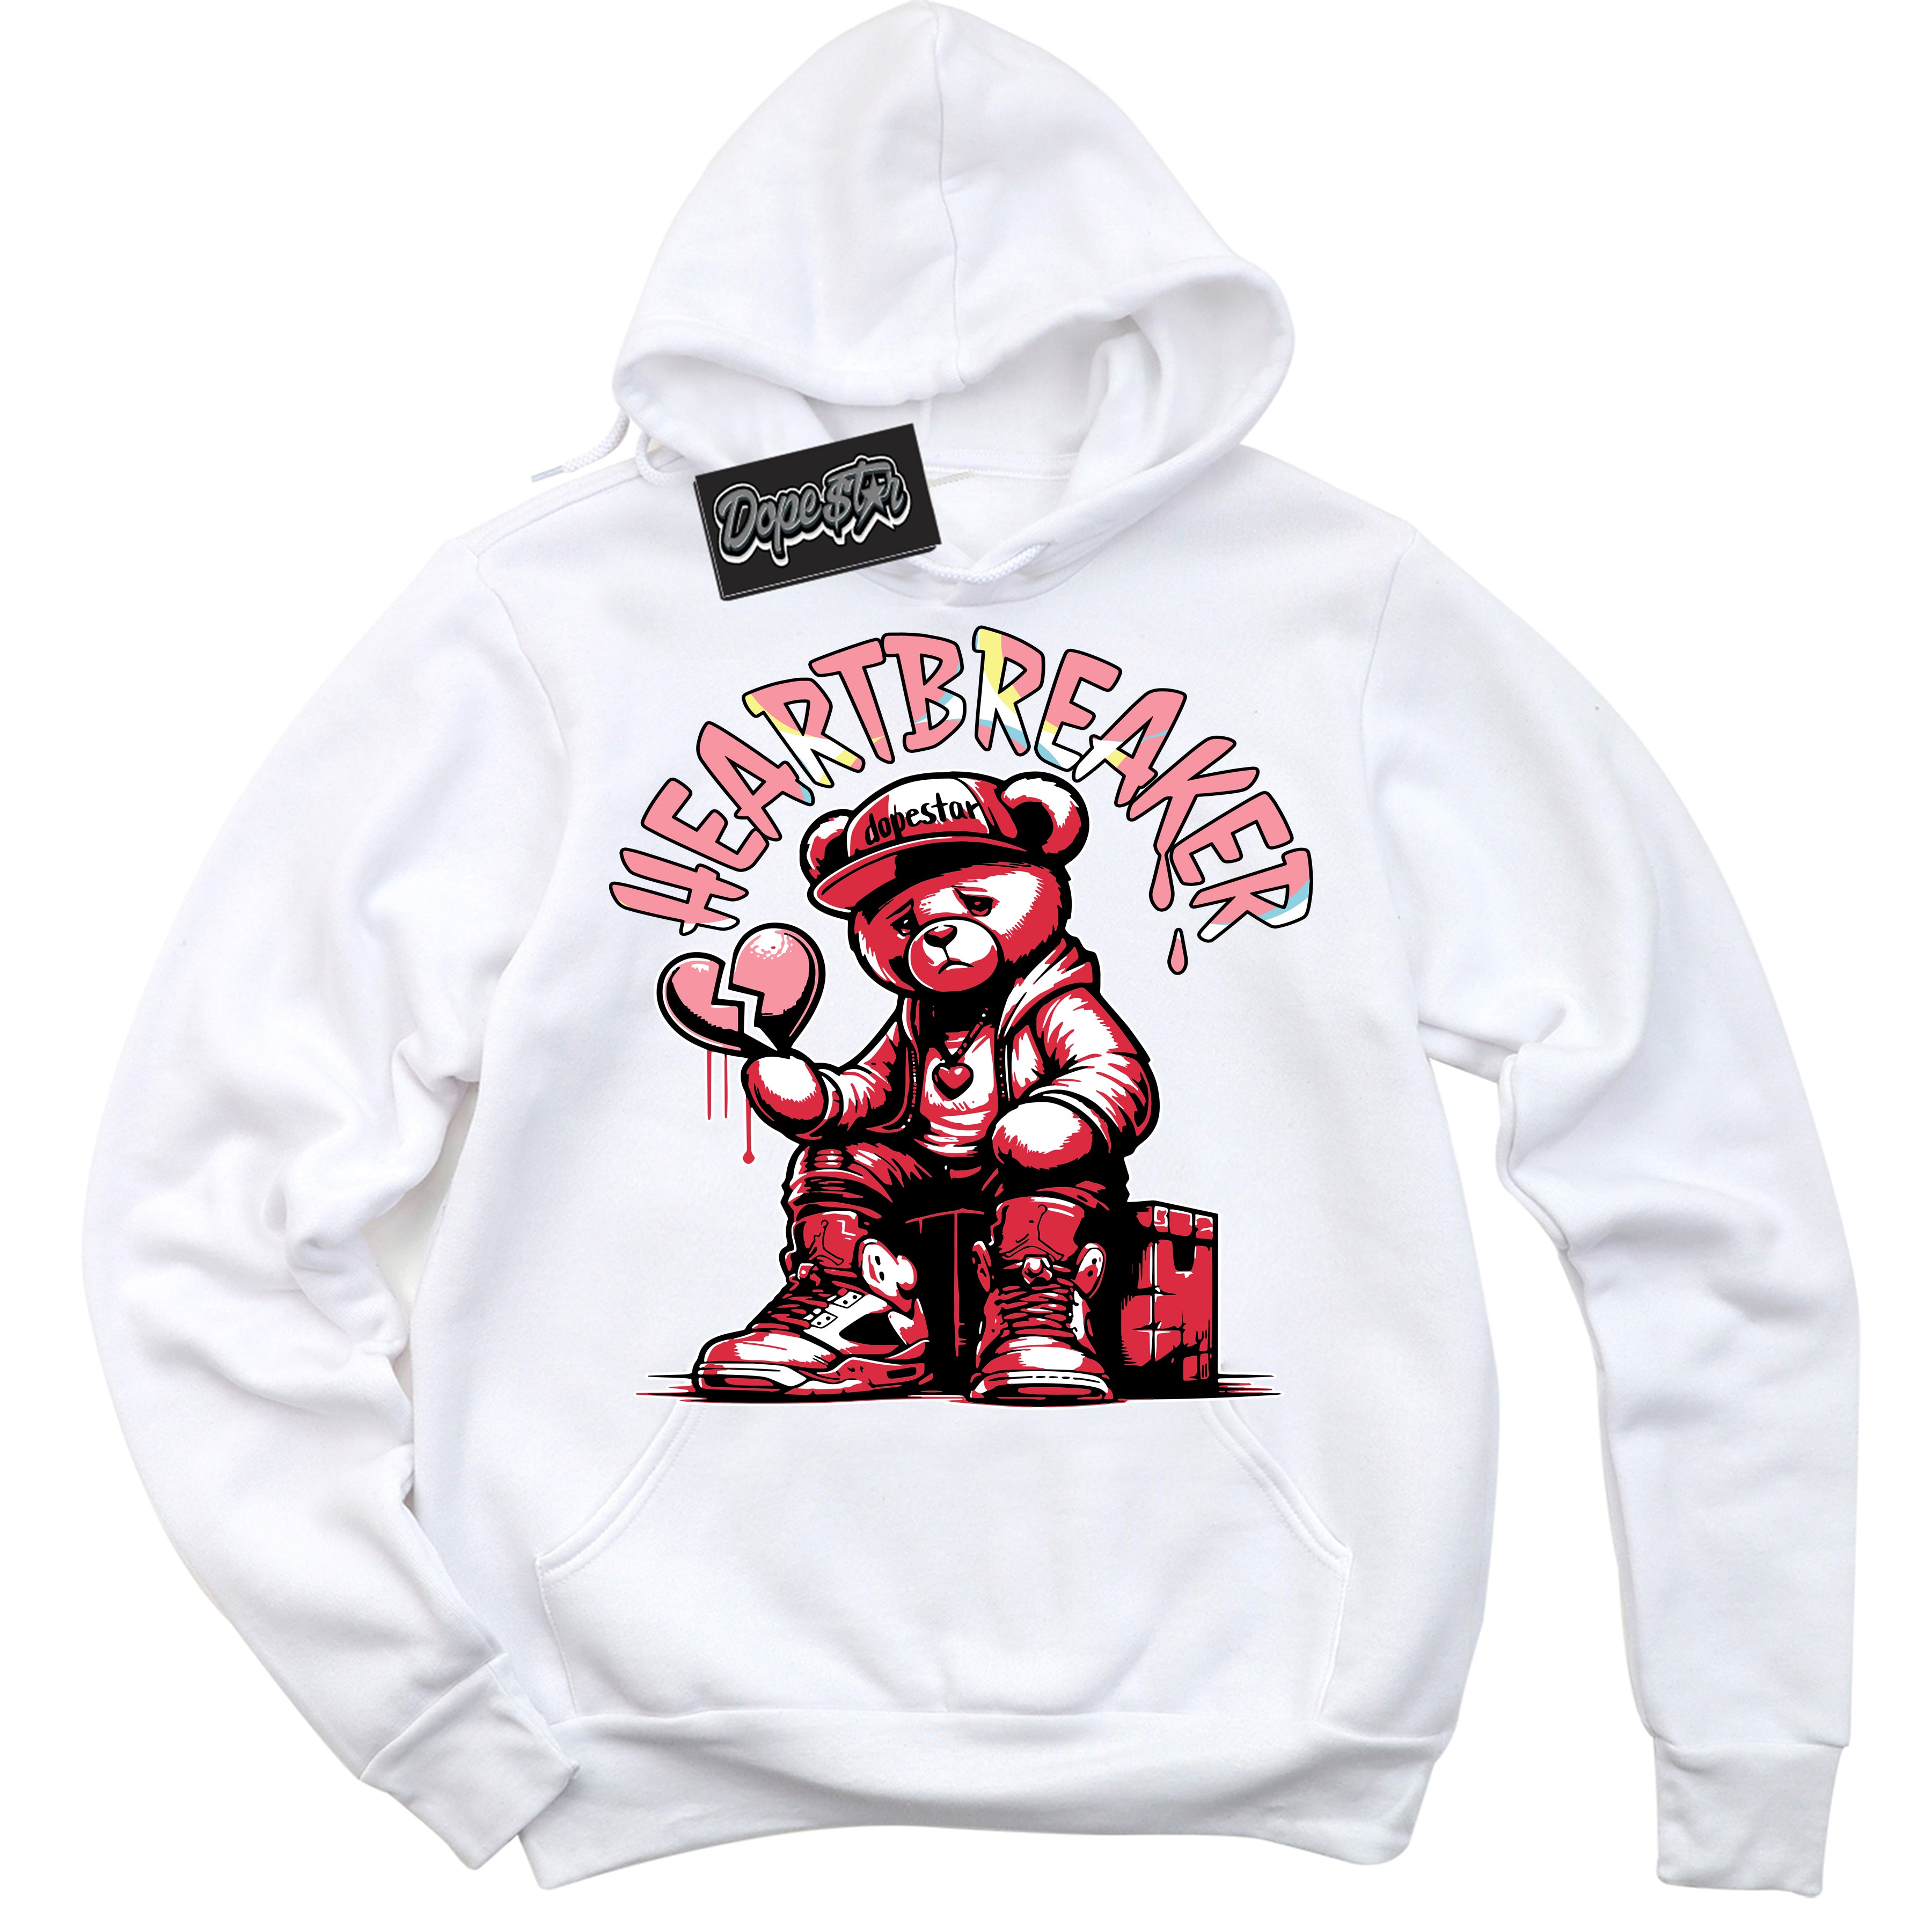 Cool White Graphic DopeStar Hoodie with “ Heartbreaker Bear “ print, that perfectly matches Spider-Verse 1s sneakers